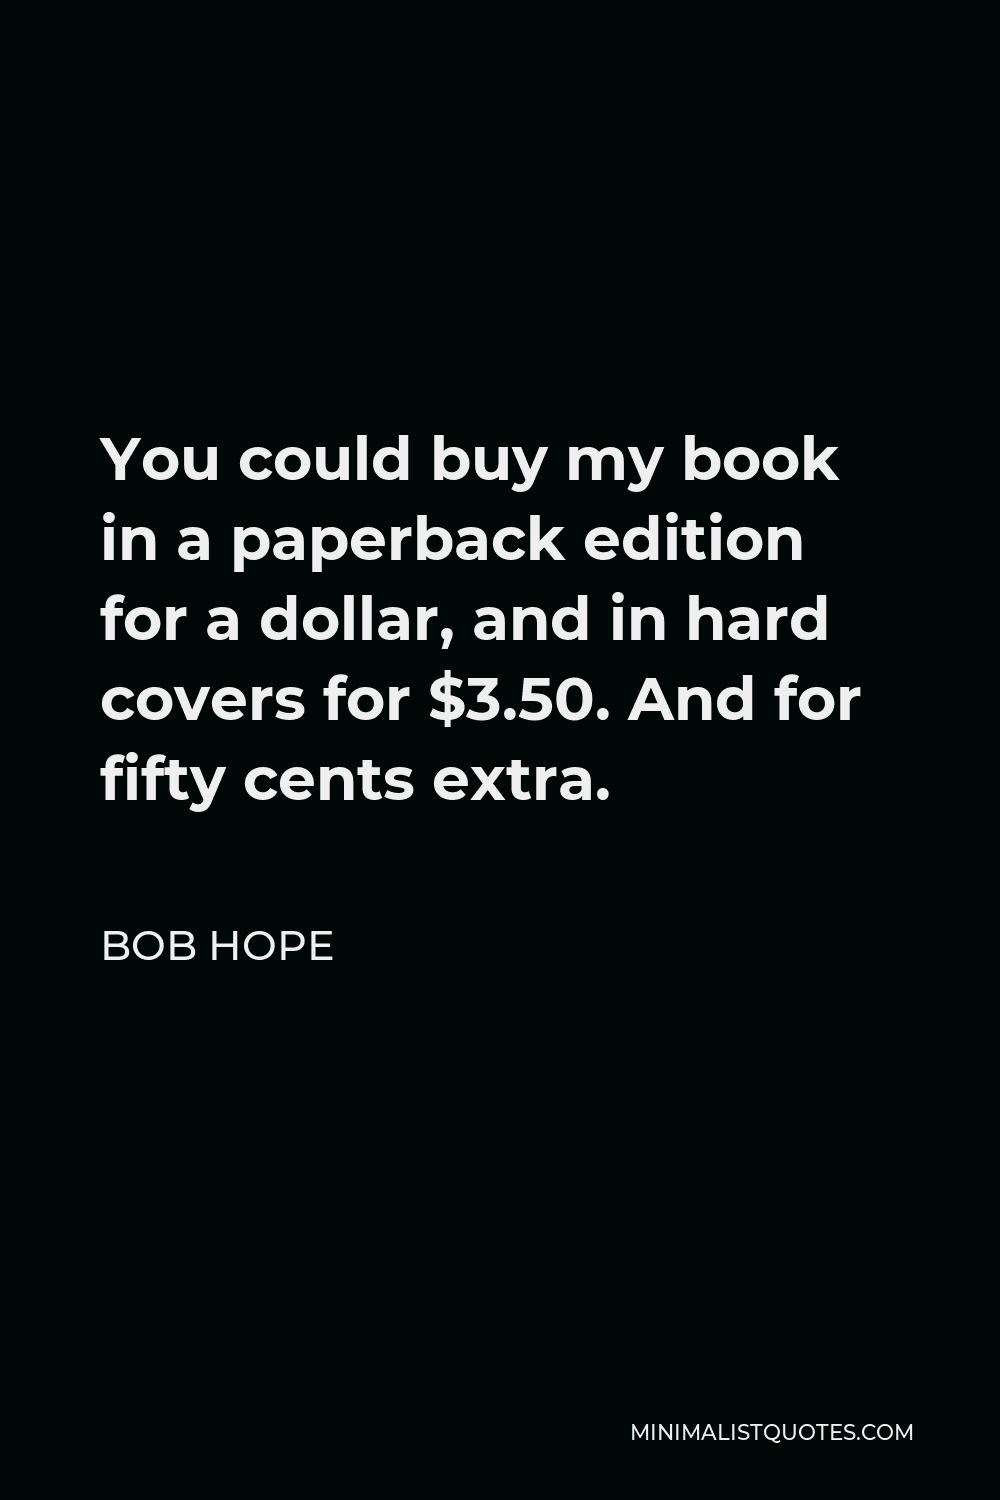 Bob Hope Quote - You could buy my book in a paperback edition for a dollar, and in hard covers for $3.50. And for fifty cents extra.